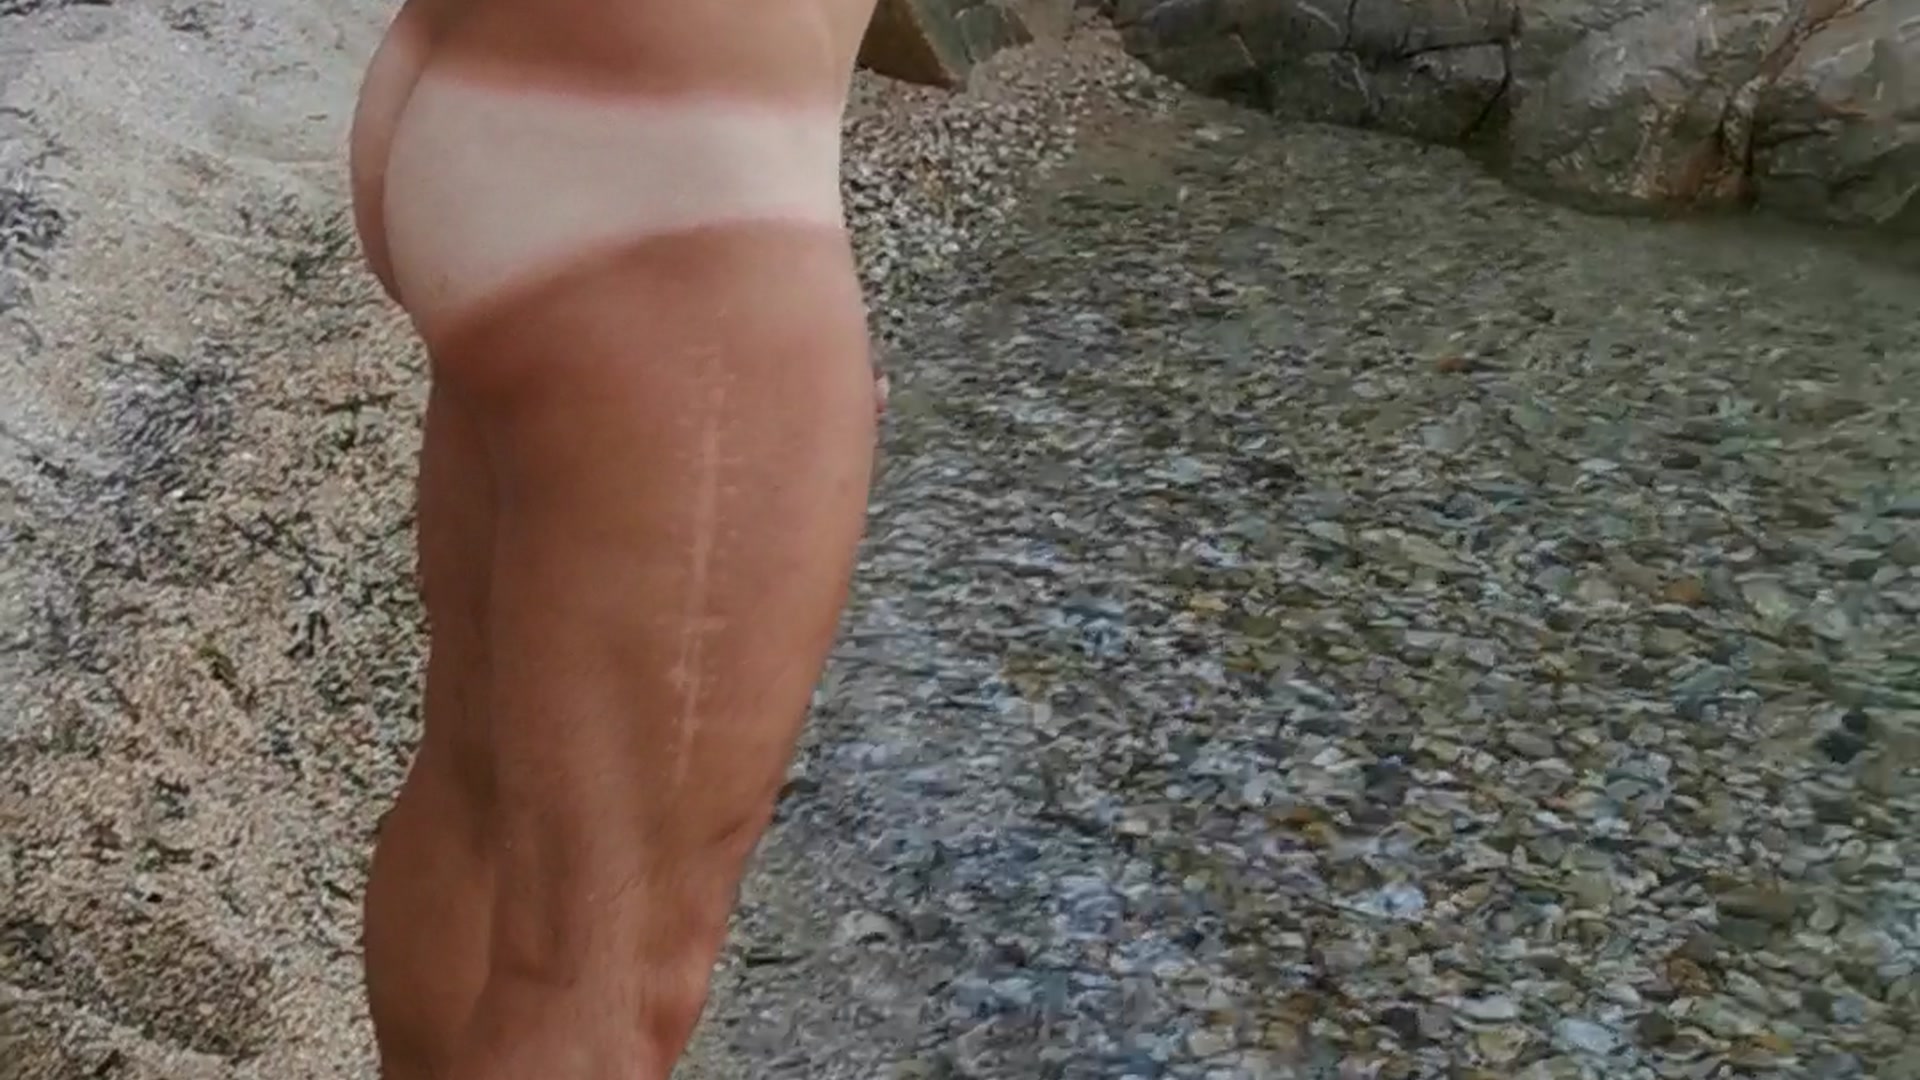 Showing off my tanline at a nudist beach